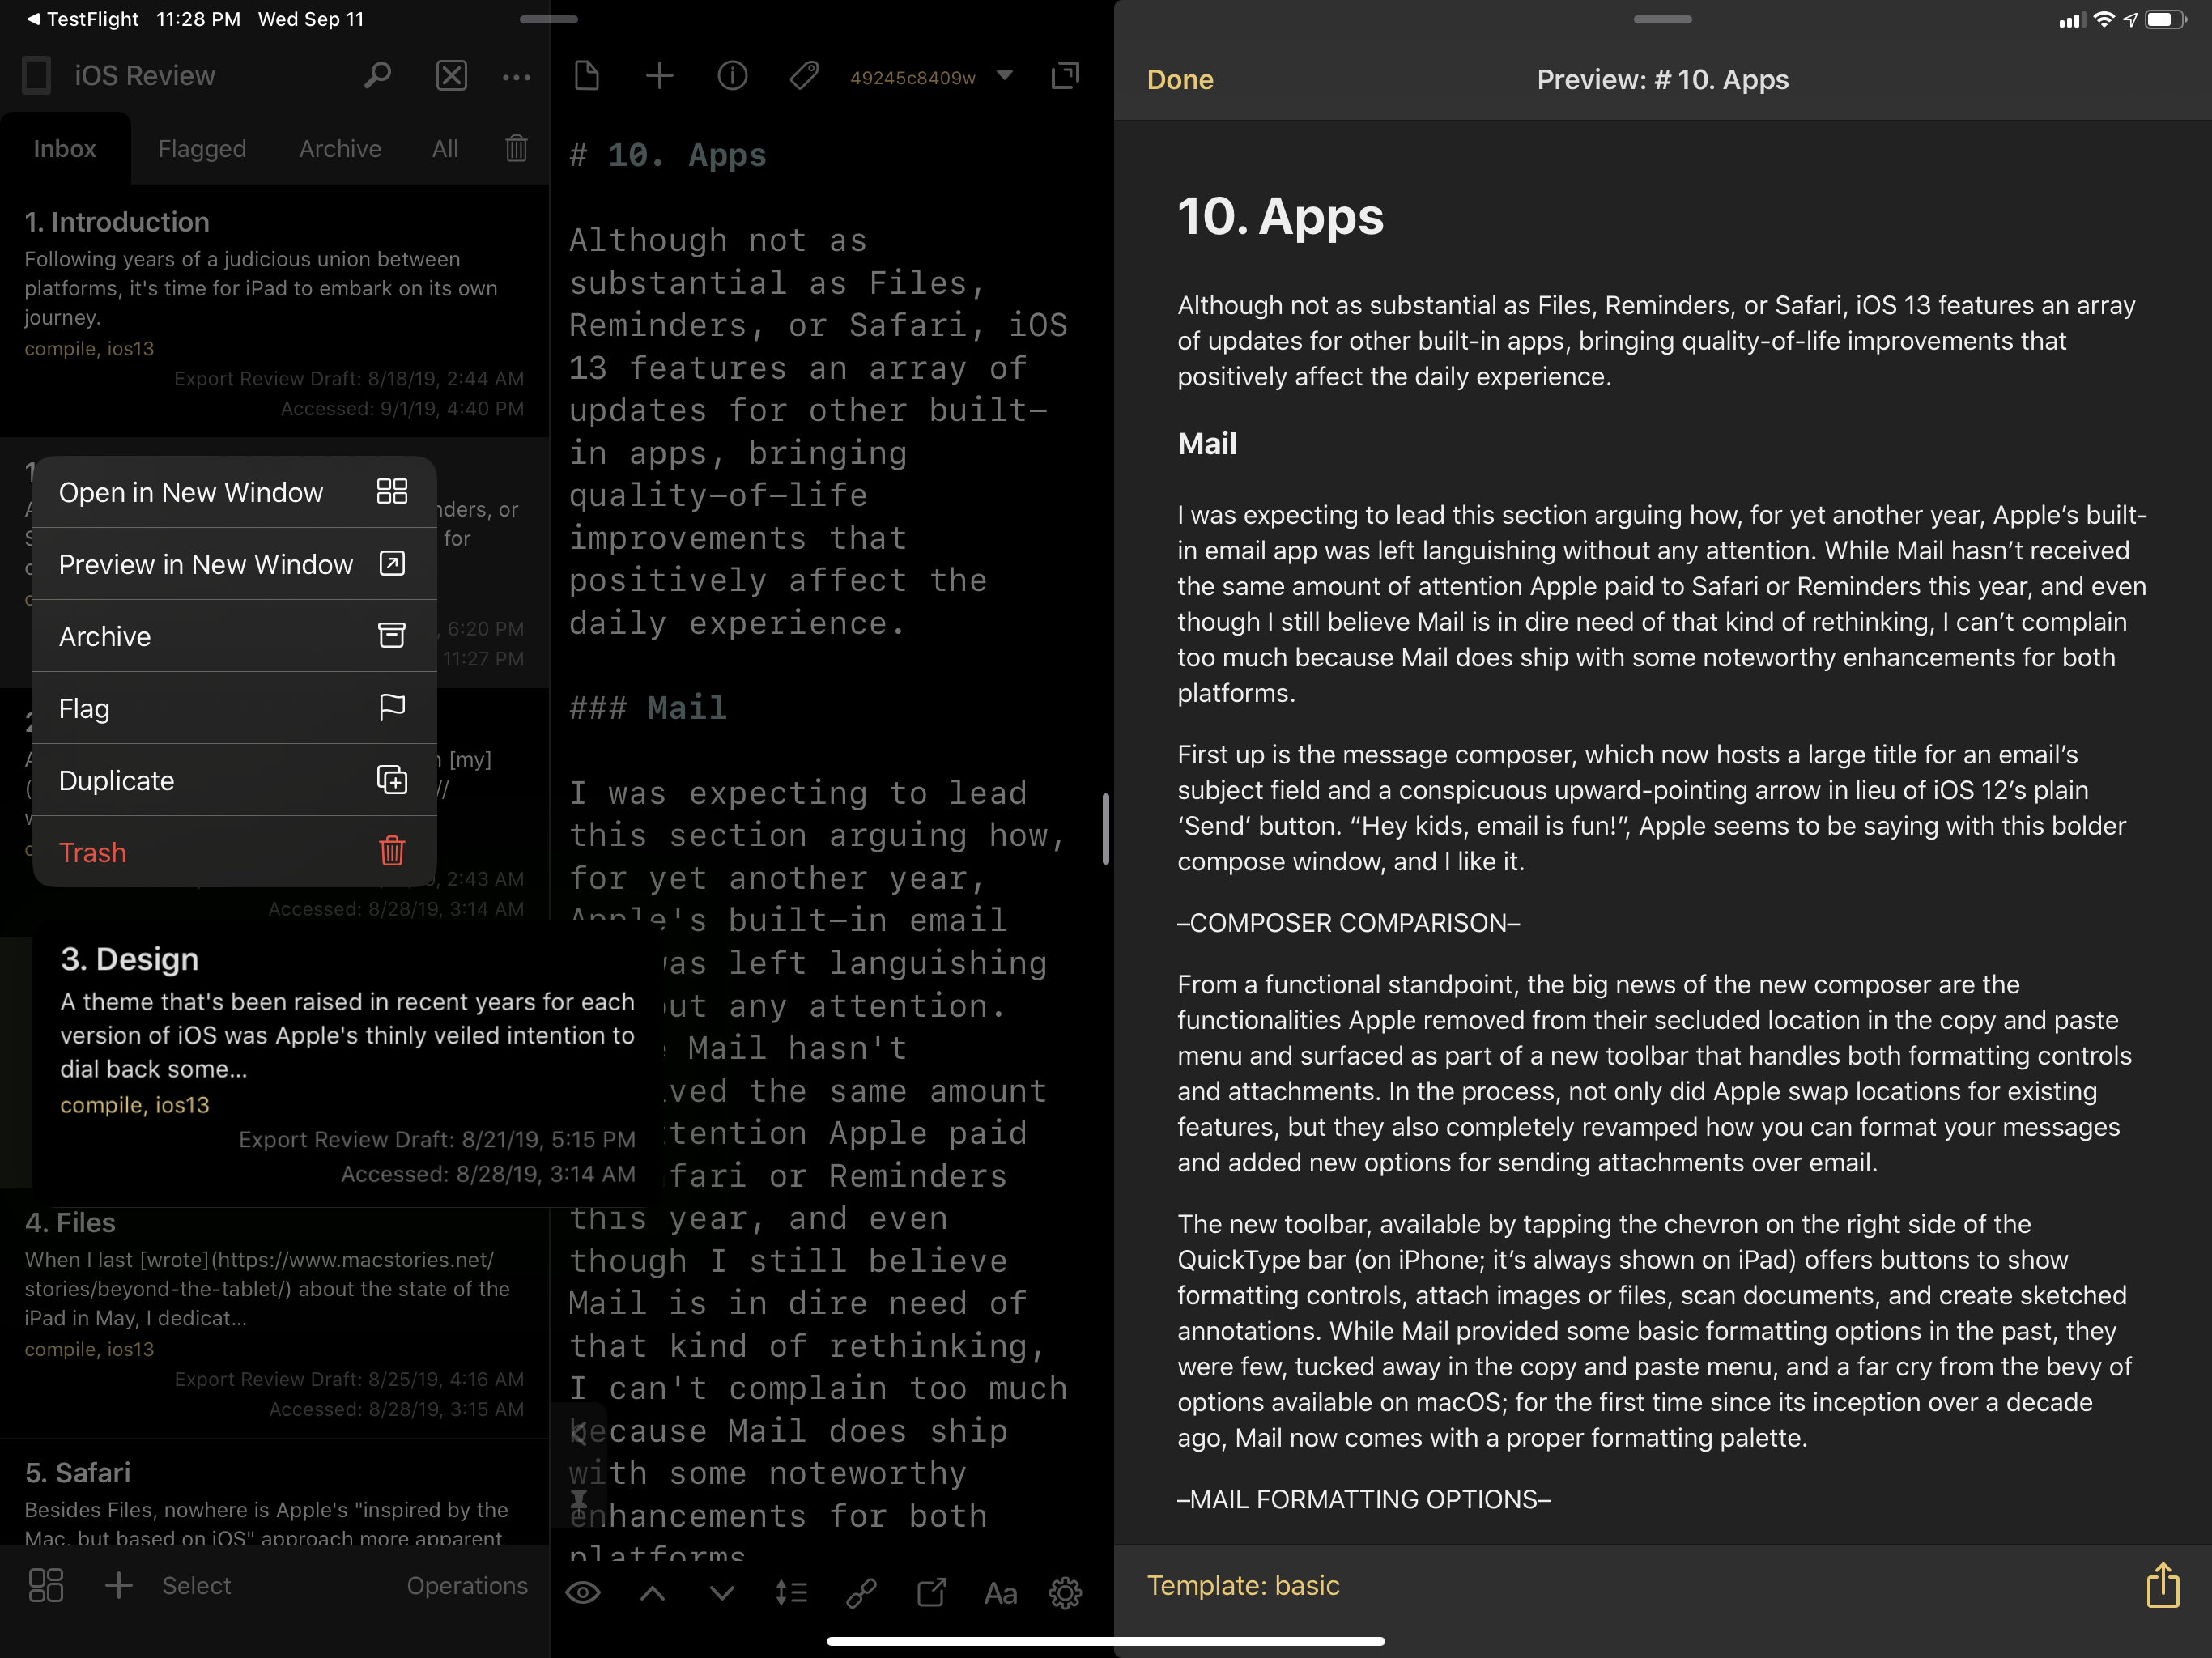 You can preview Markdown notes in separate windows with Drafts 15, and there's also a context menu to open new windows.